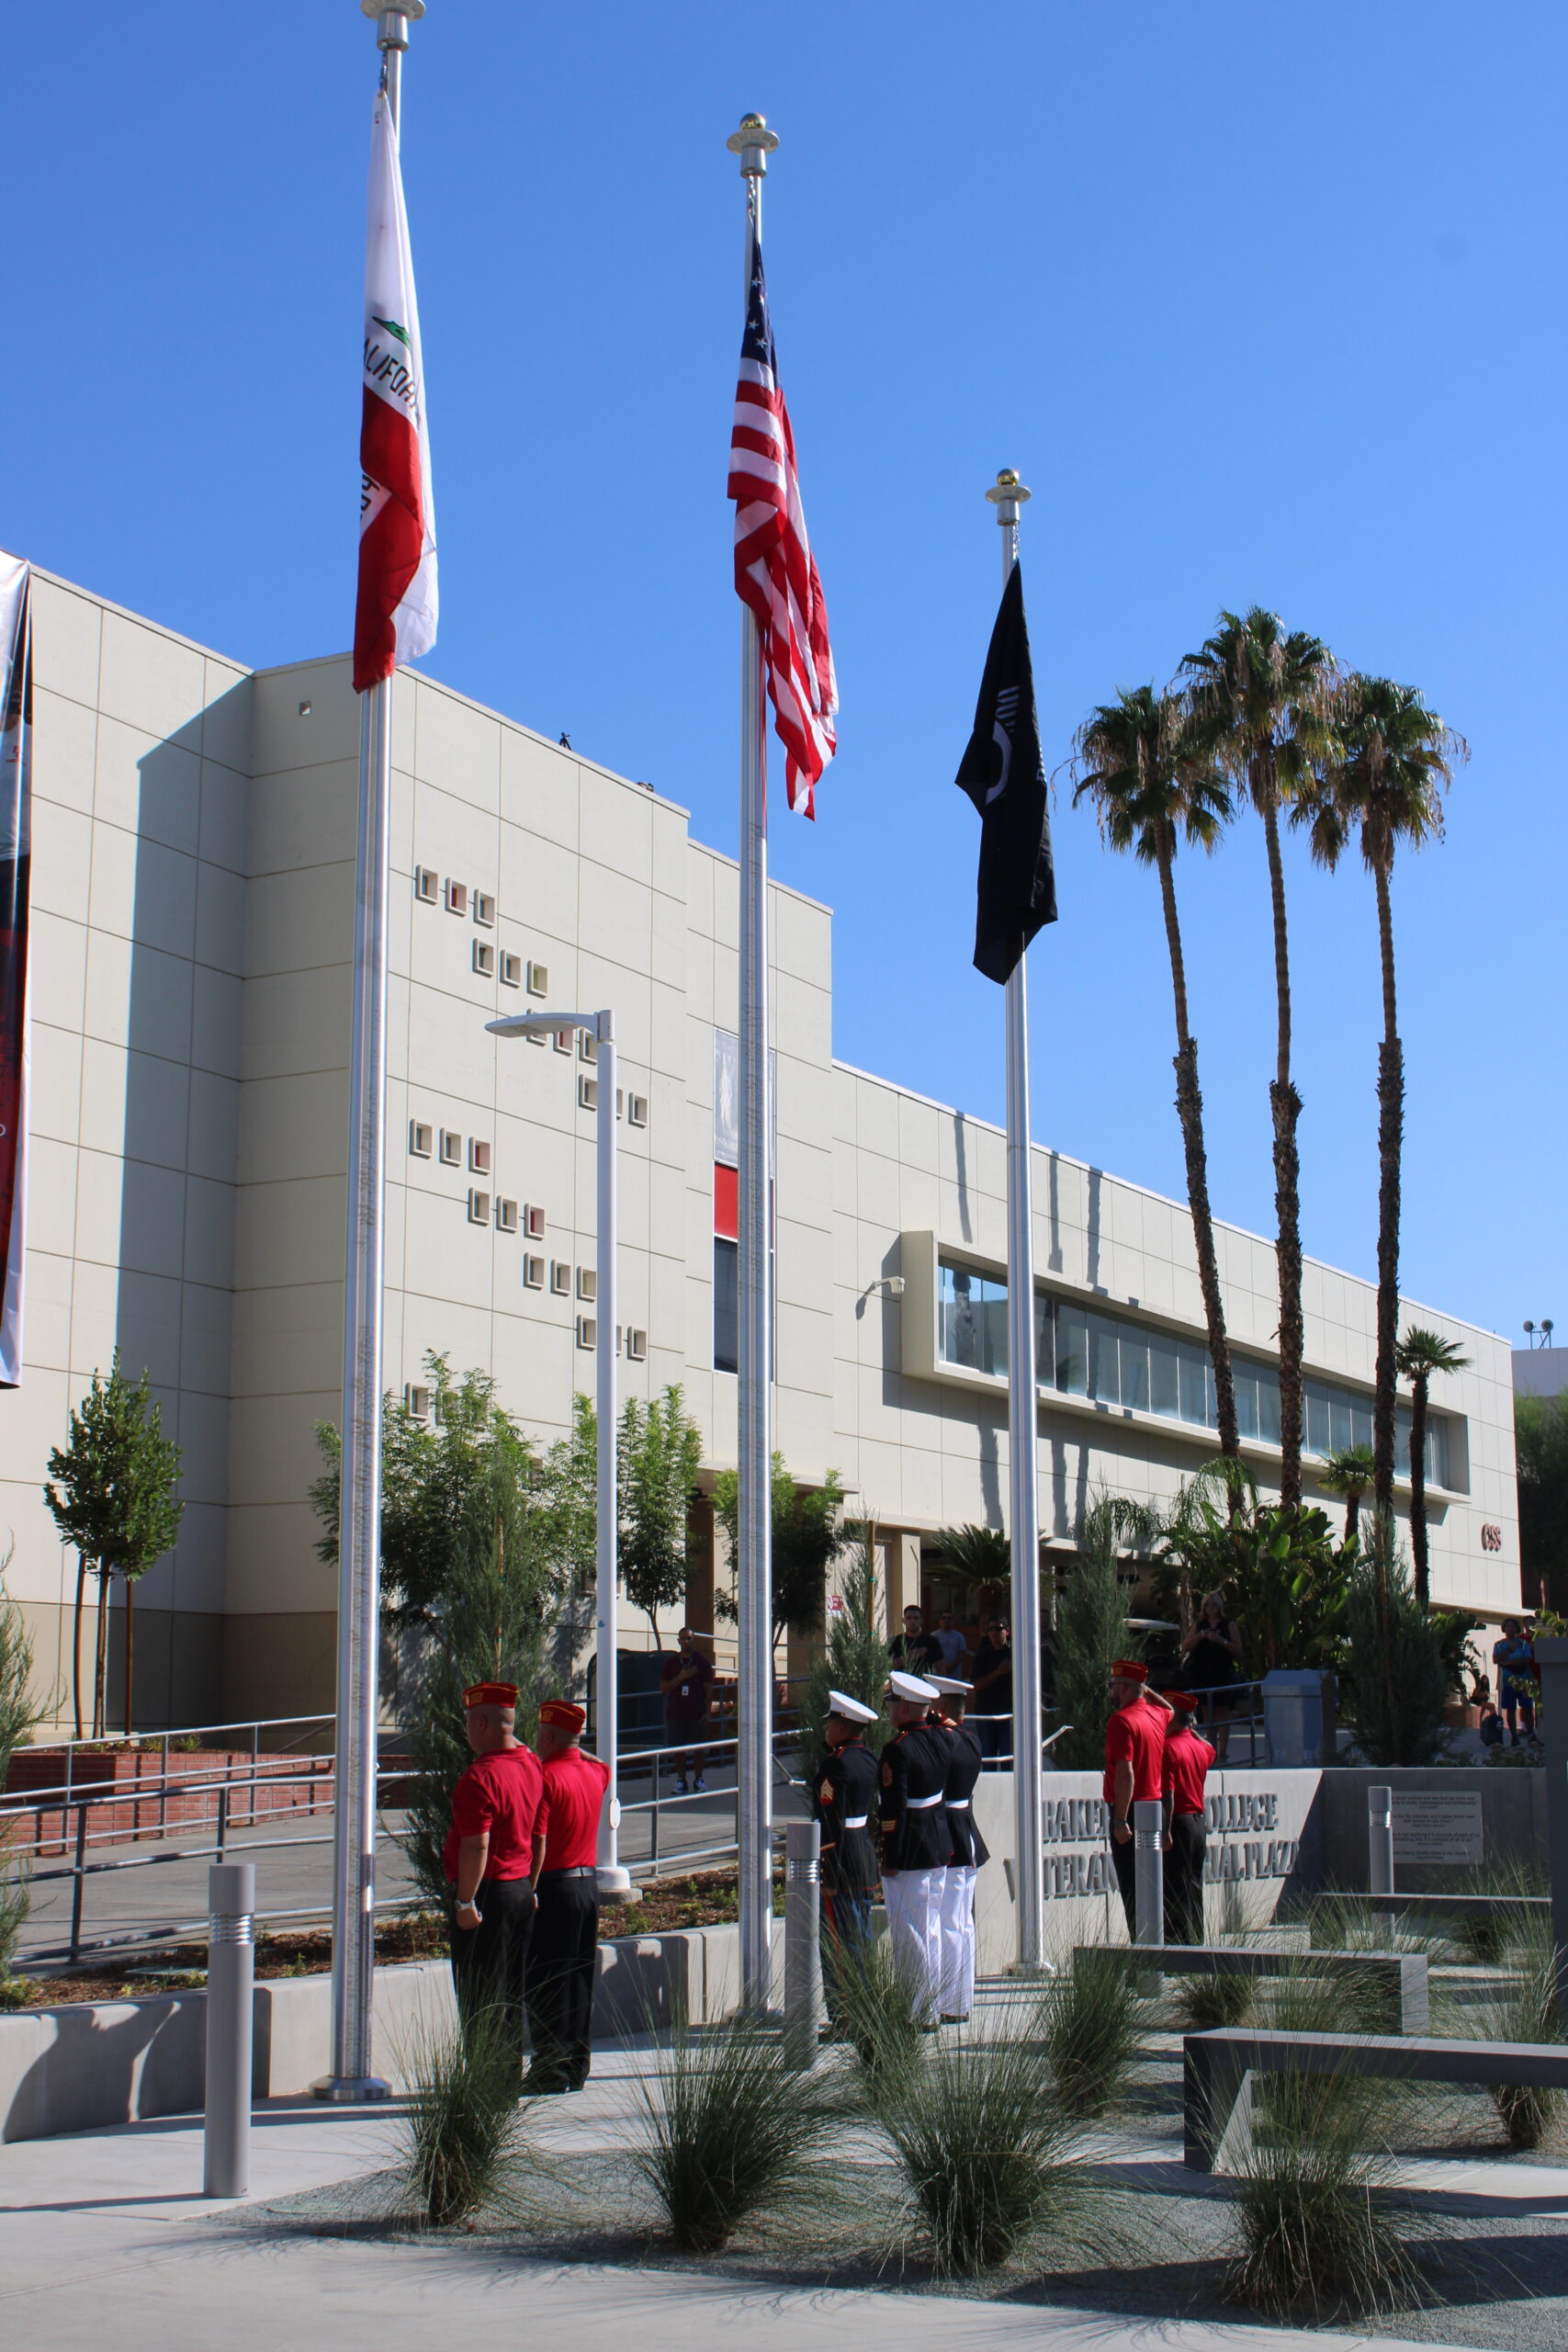 Soldiers putting up the flags on the poles for the new Veterans Plaza.